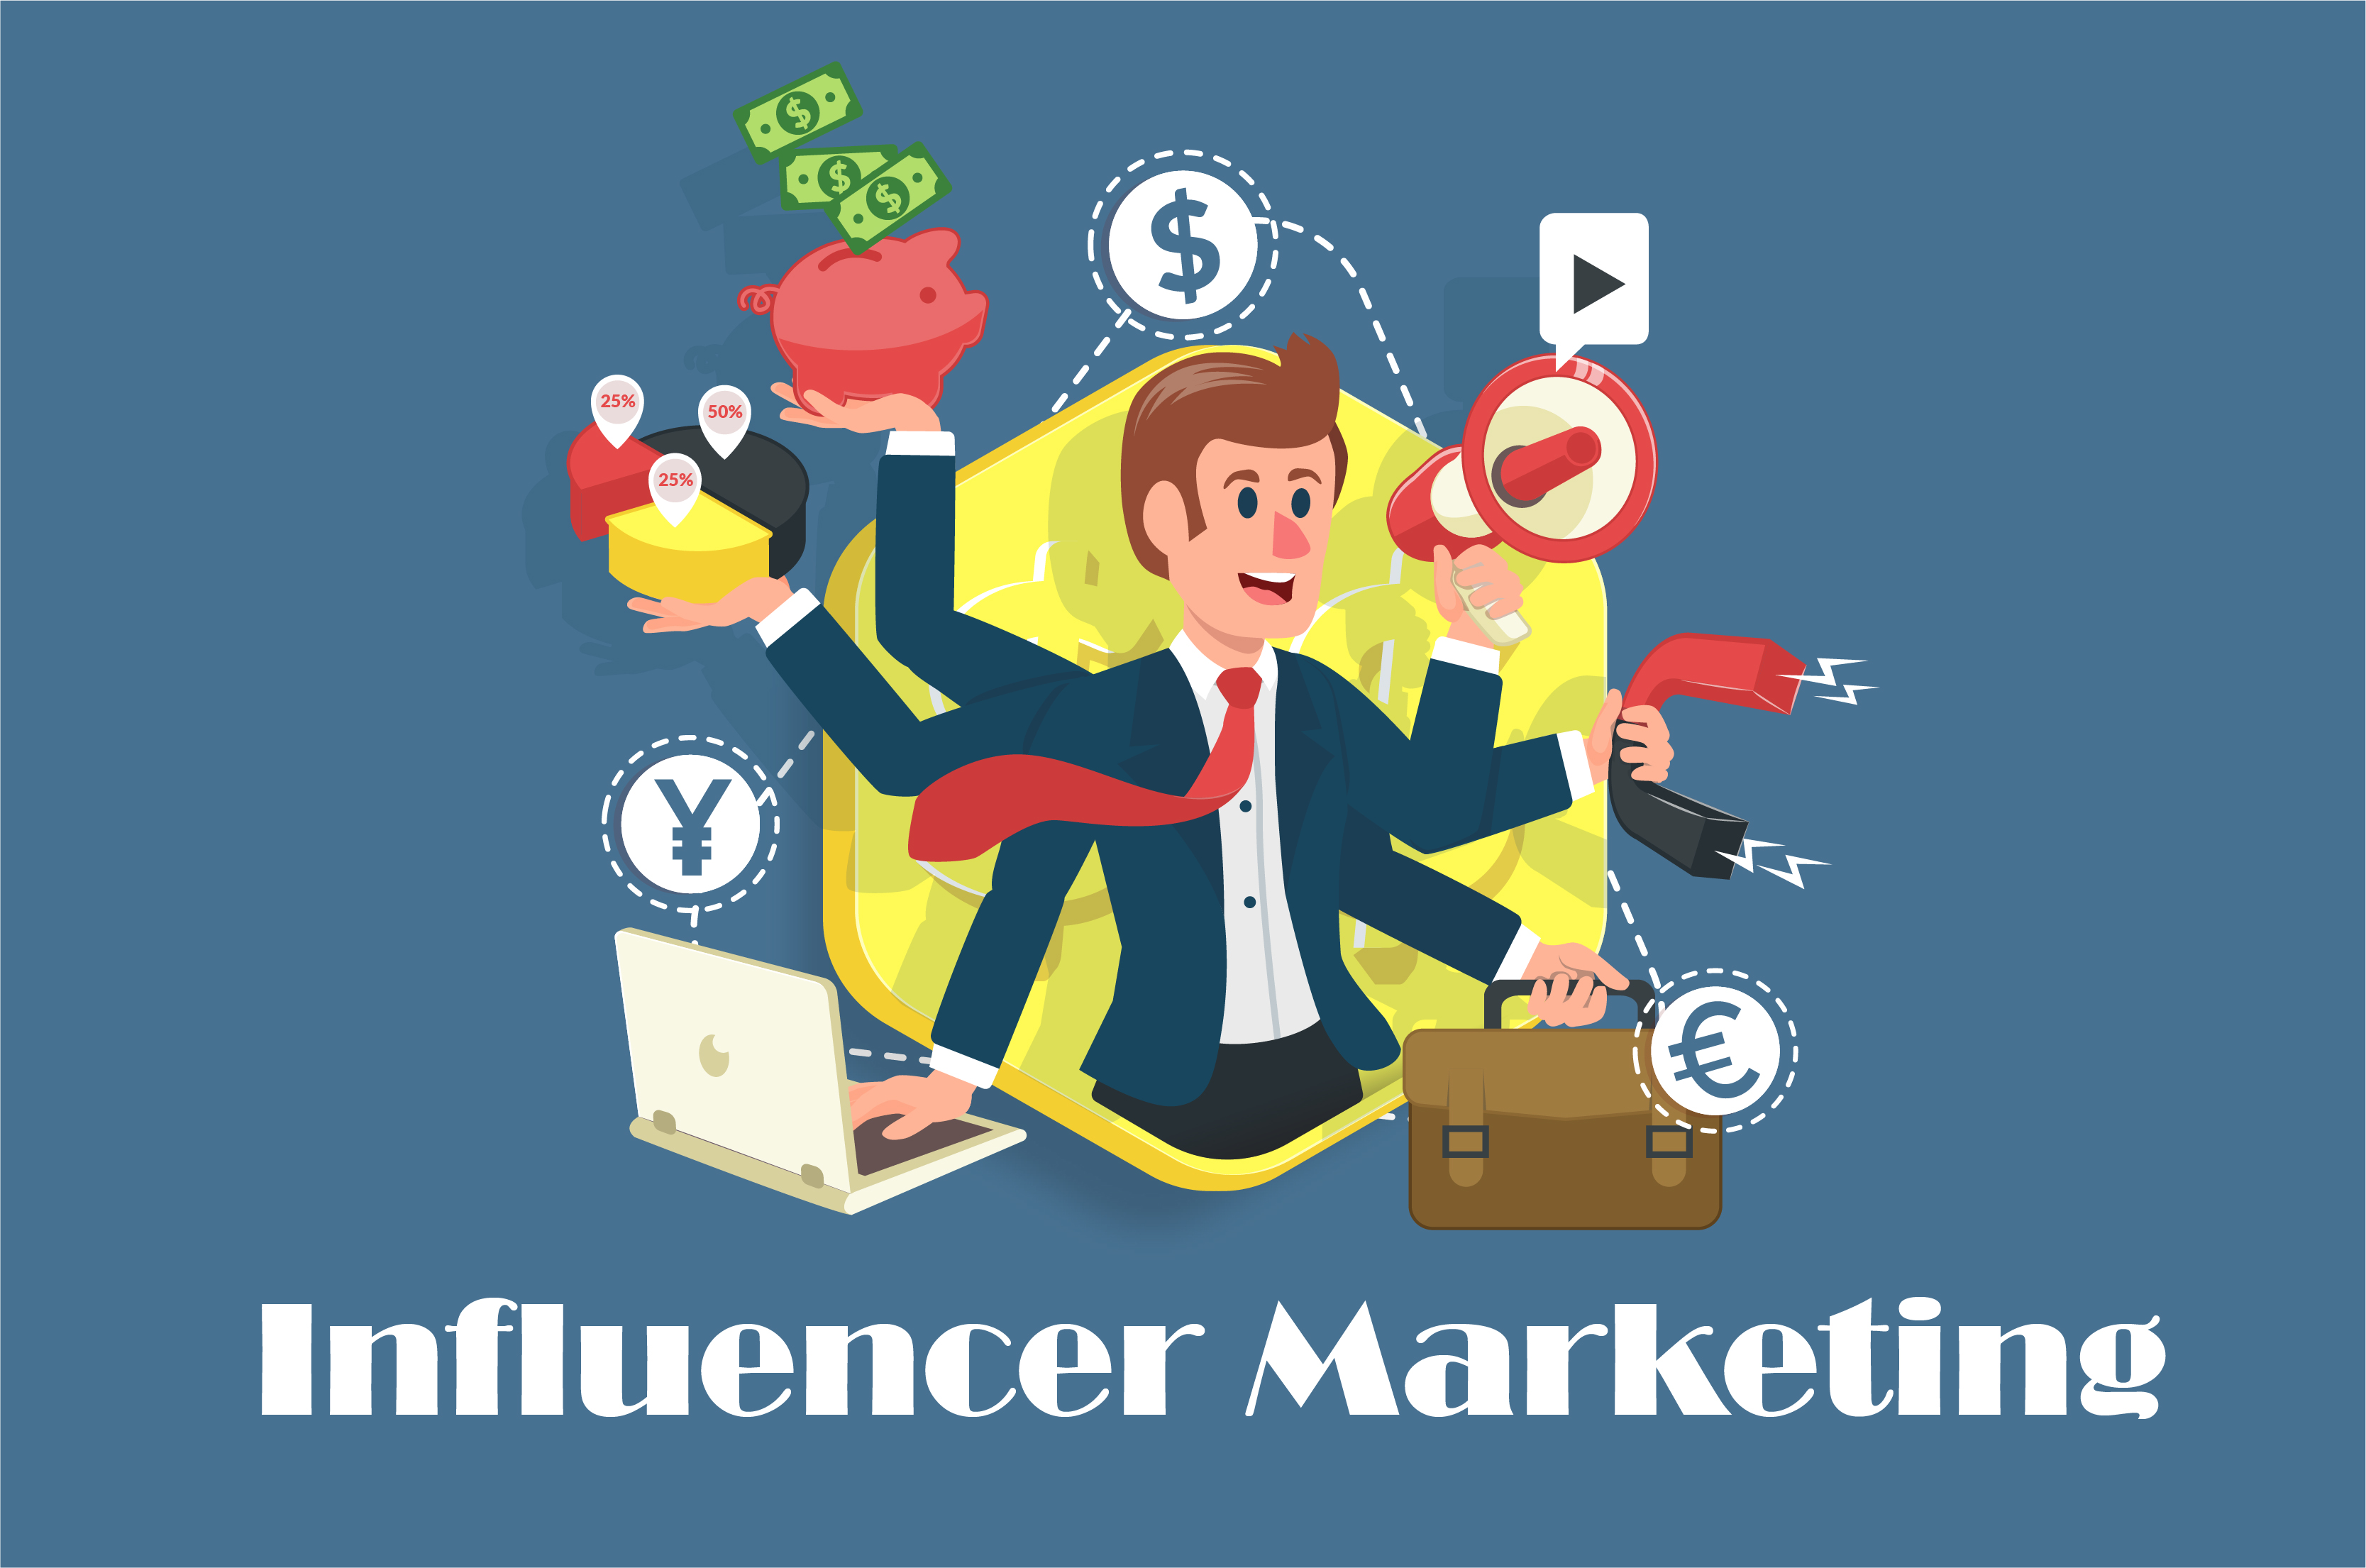 Influencer Marketing The Key to foster success in your business